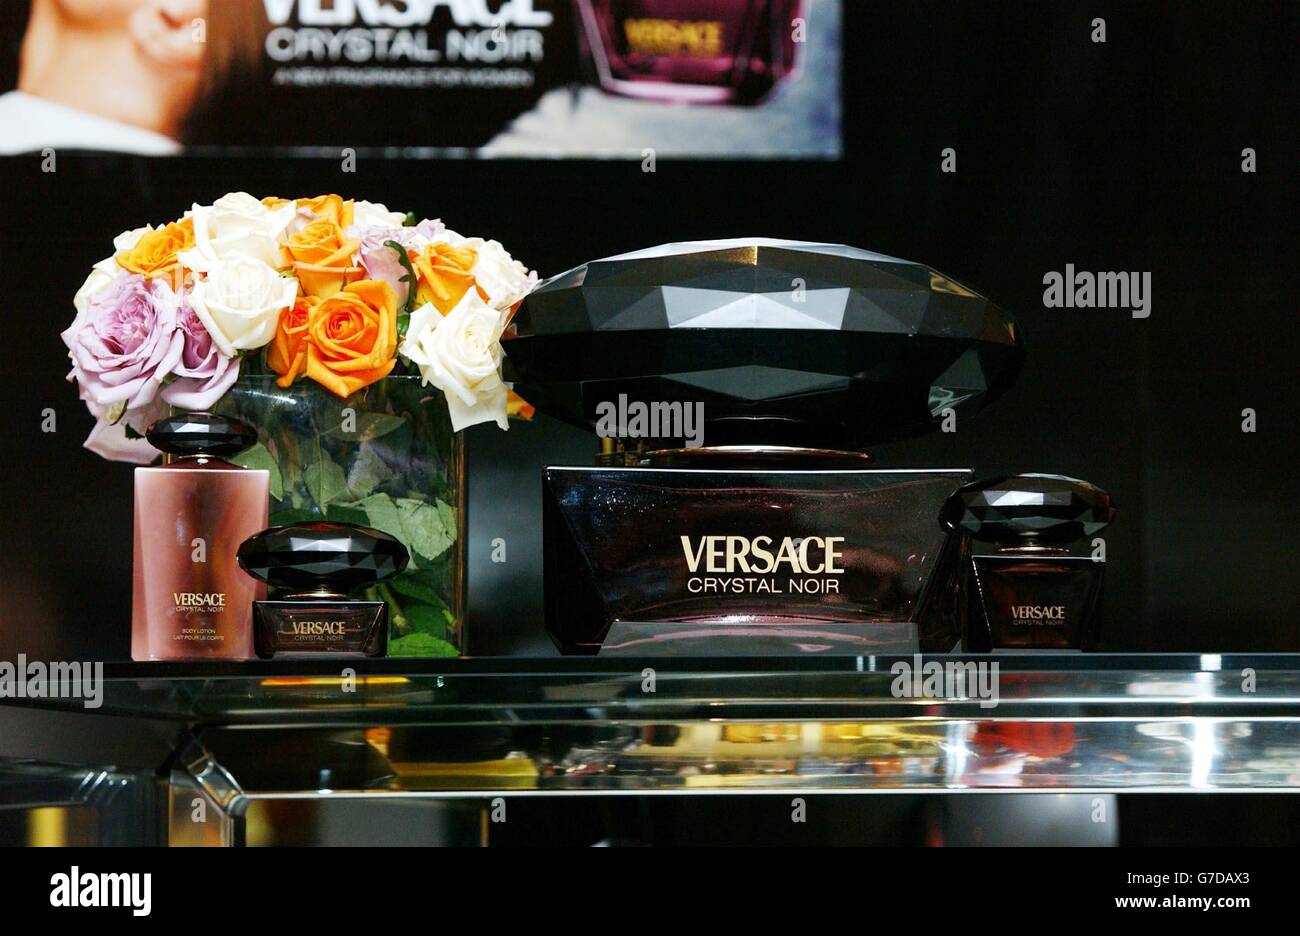 The new fragrance Crystal Noir, launched by fashion designer Donatella Versace at Harrods in central London. Stock Photo